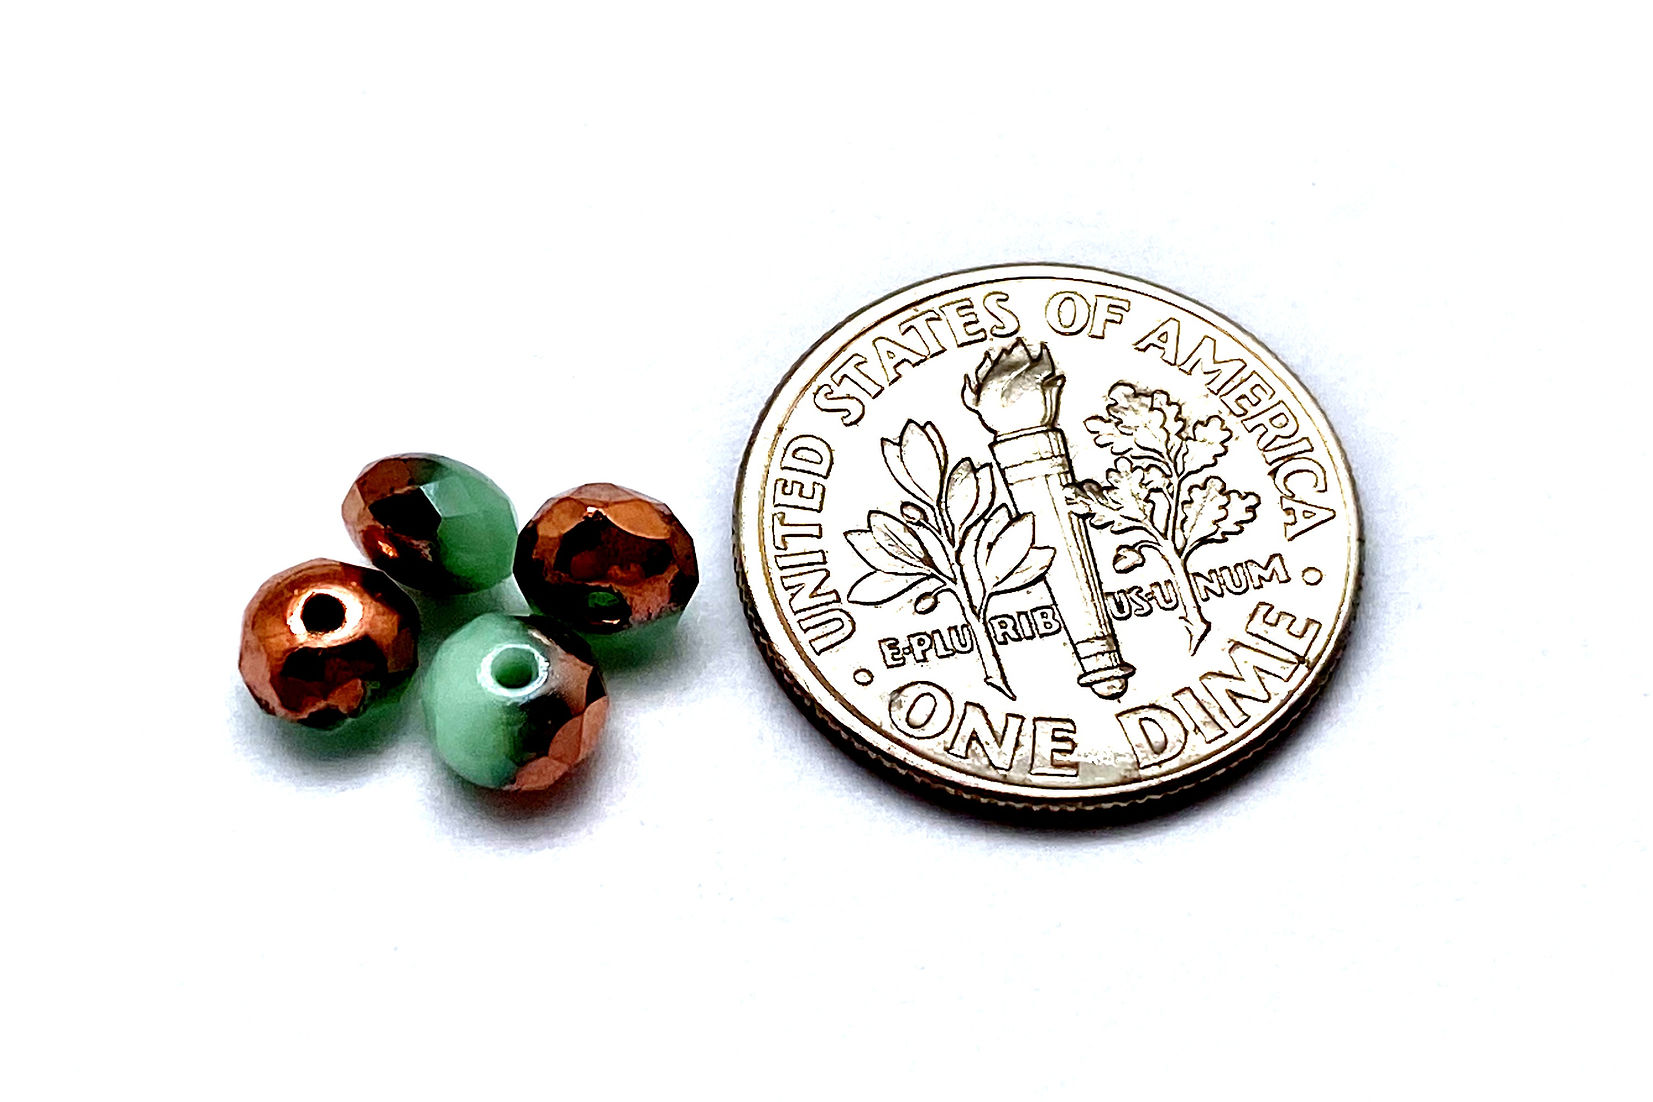 3x5mm Minty Blue Green and Copper Czech Glass Rondelle Bead - 3.75" Strand-The Bead Gallery Honolulu